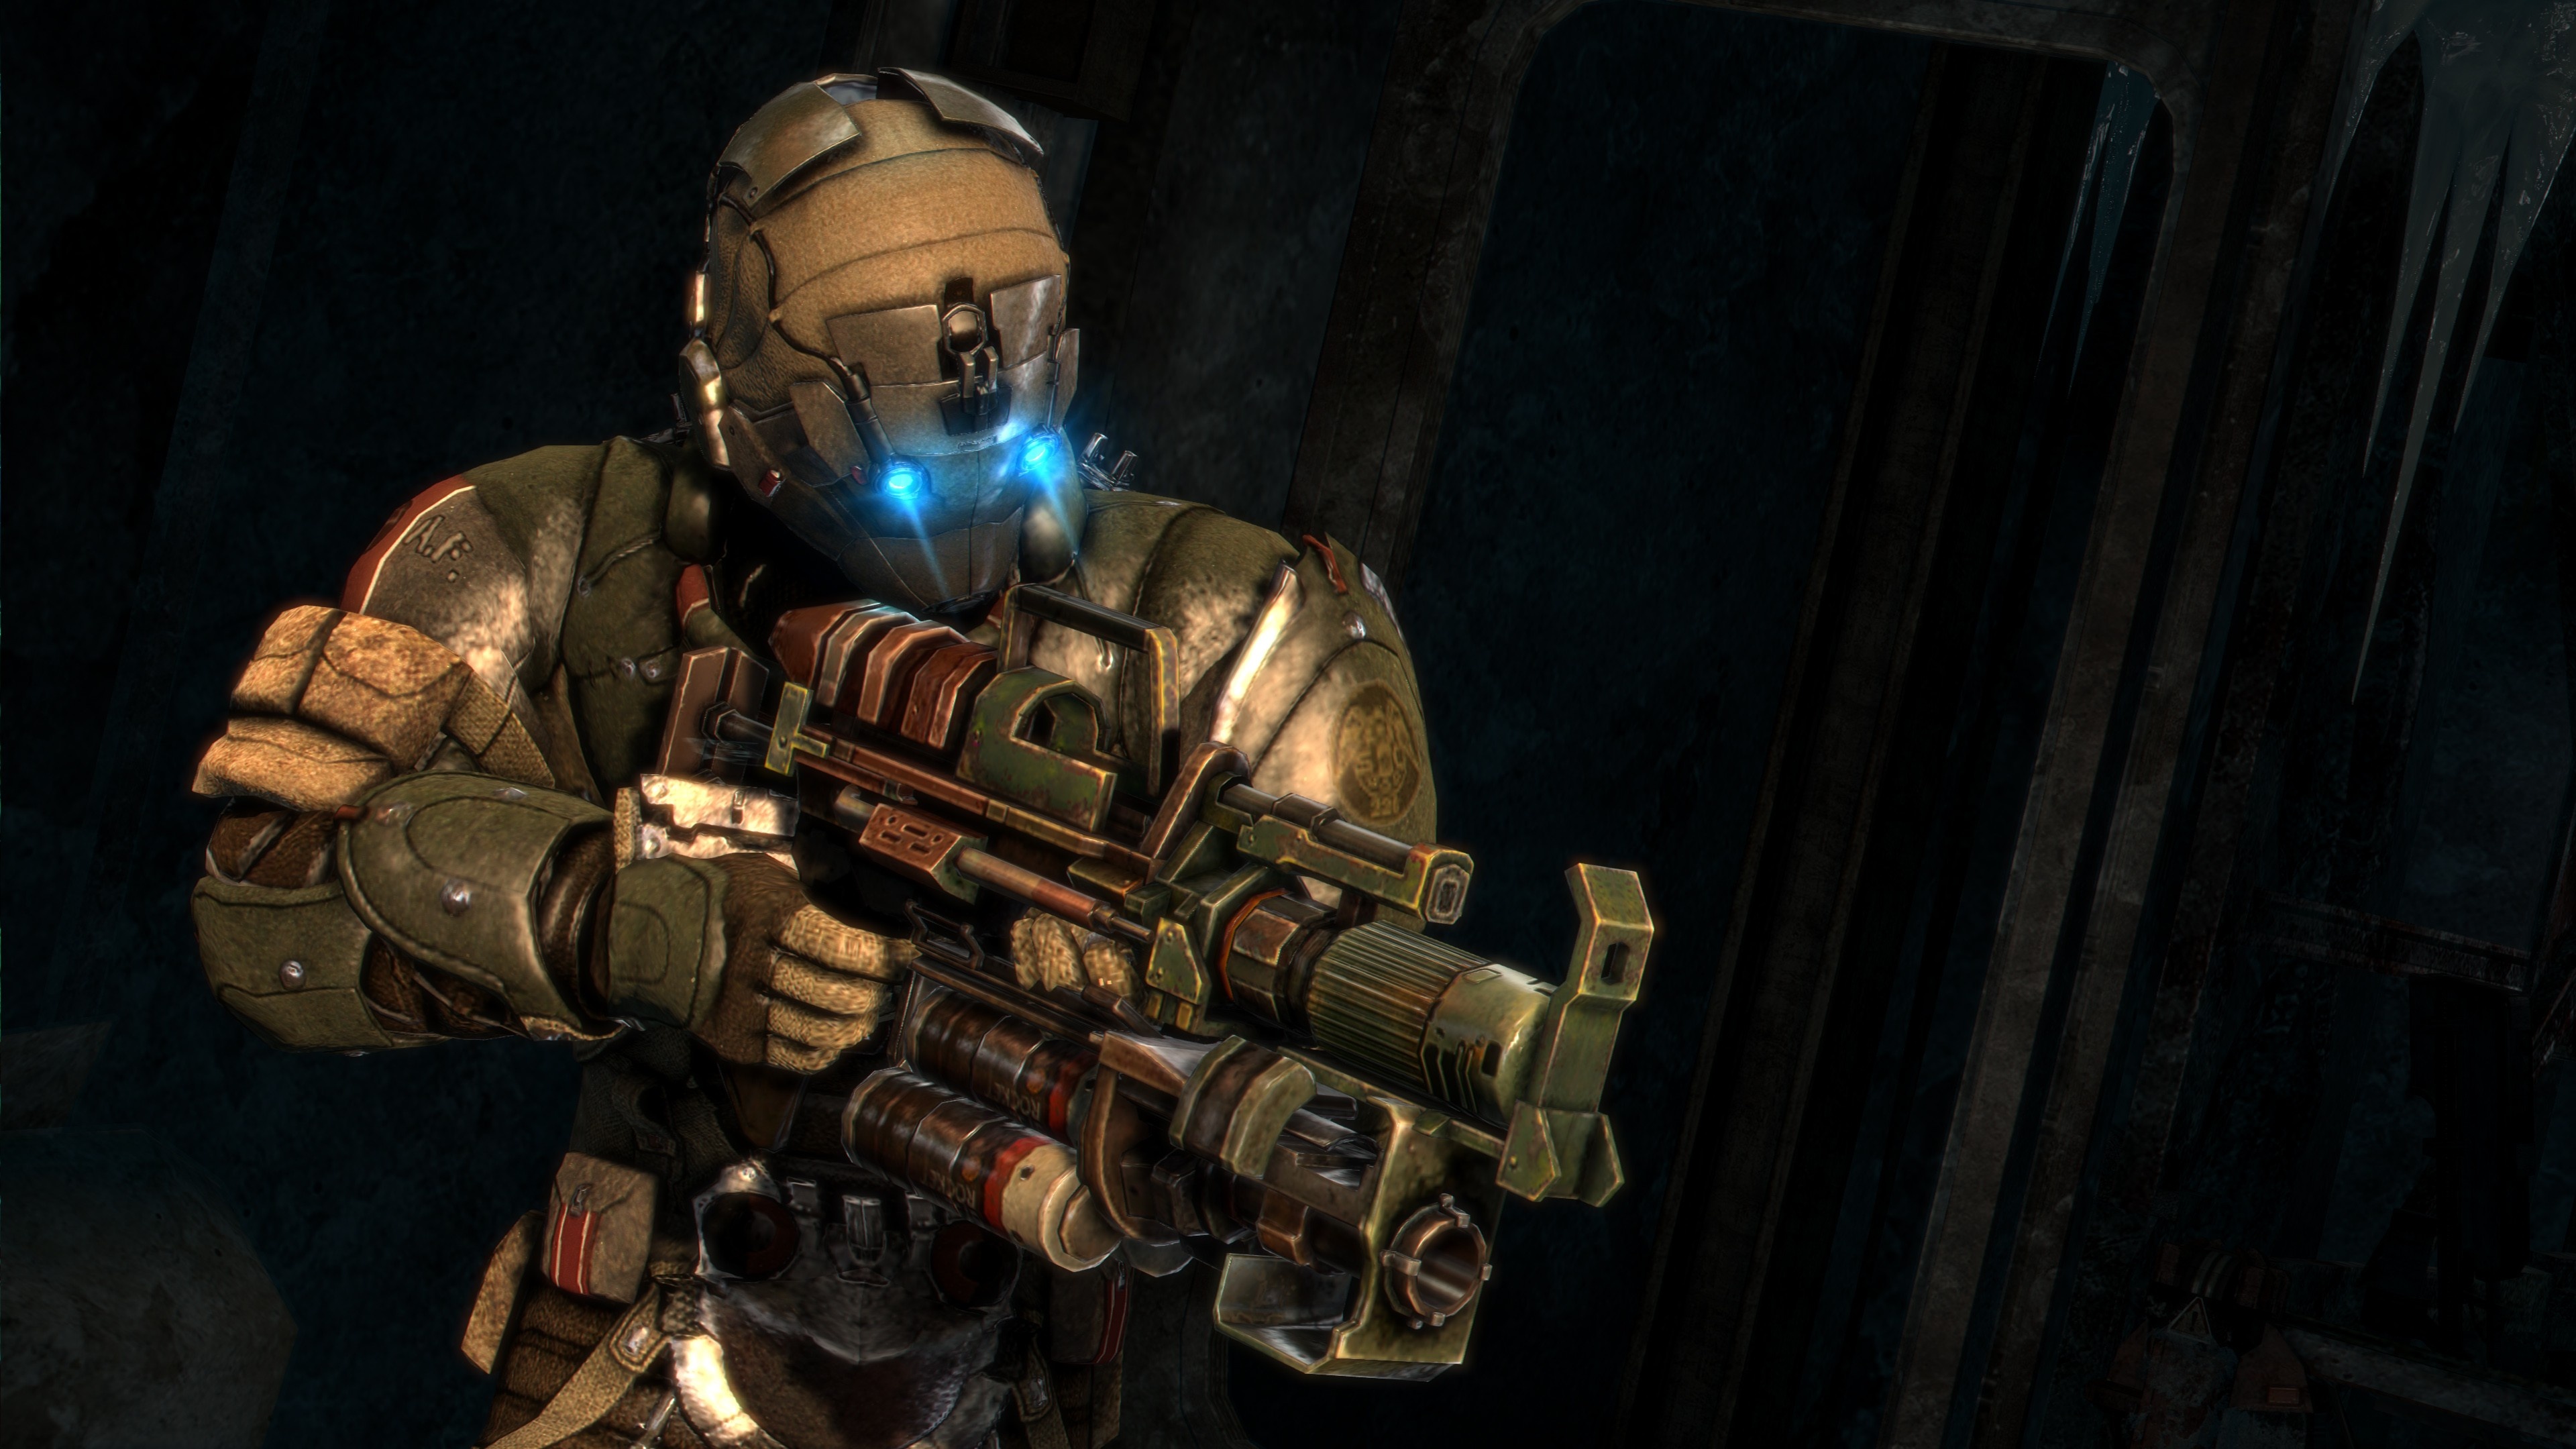 Dead Space: A science fiction media franchise developed by Visceral Games. 3840x2160 4K Background.